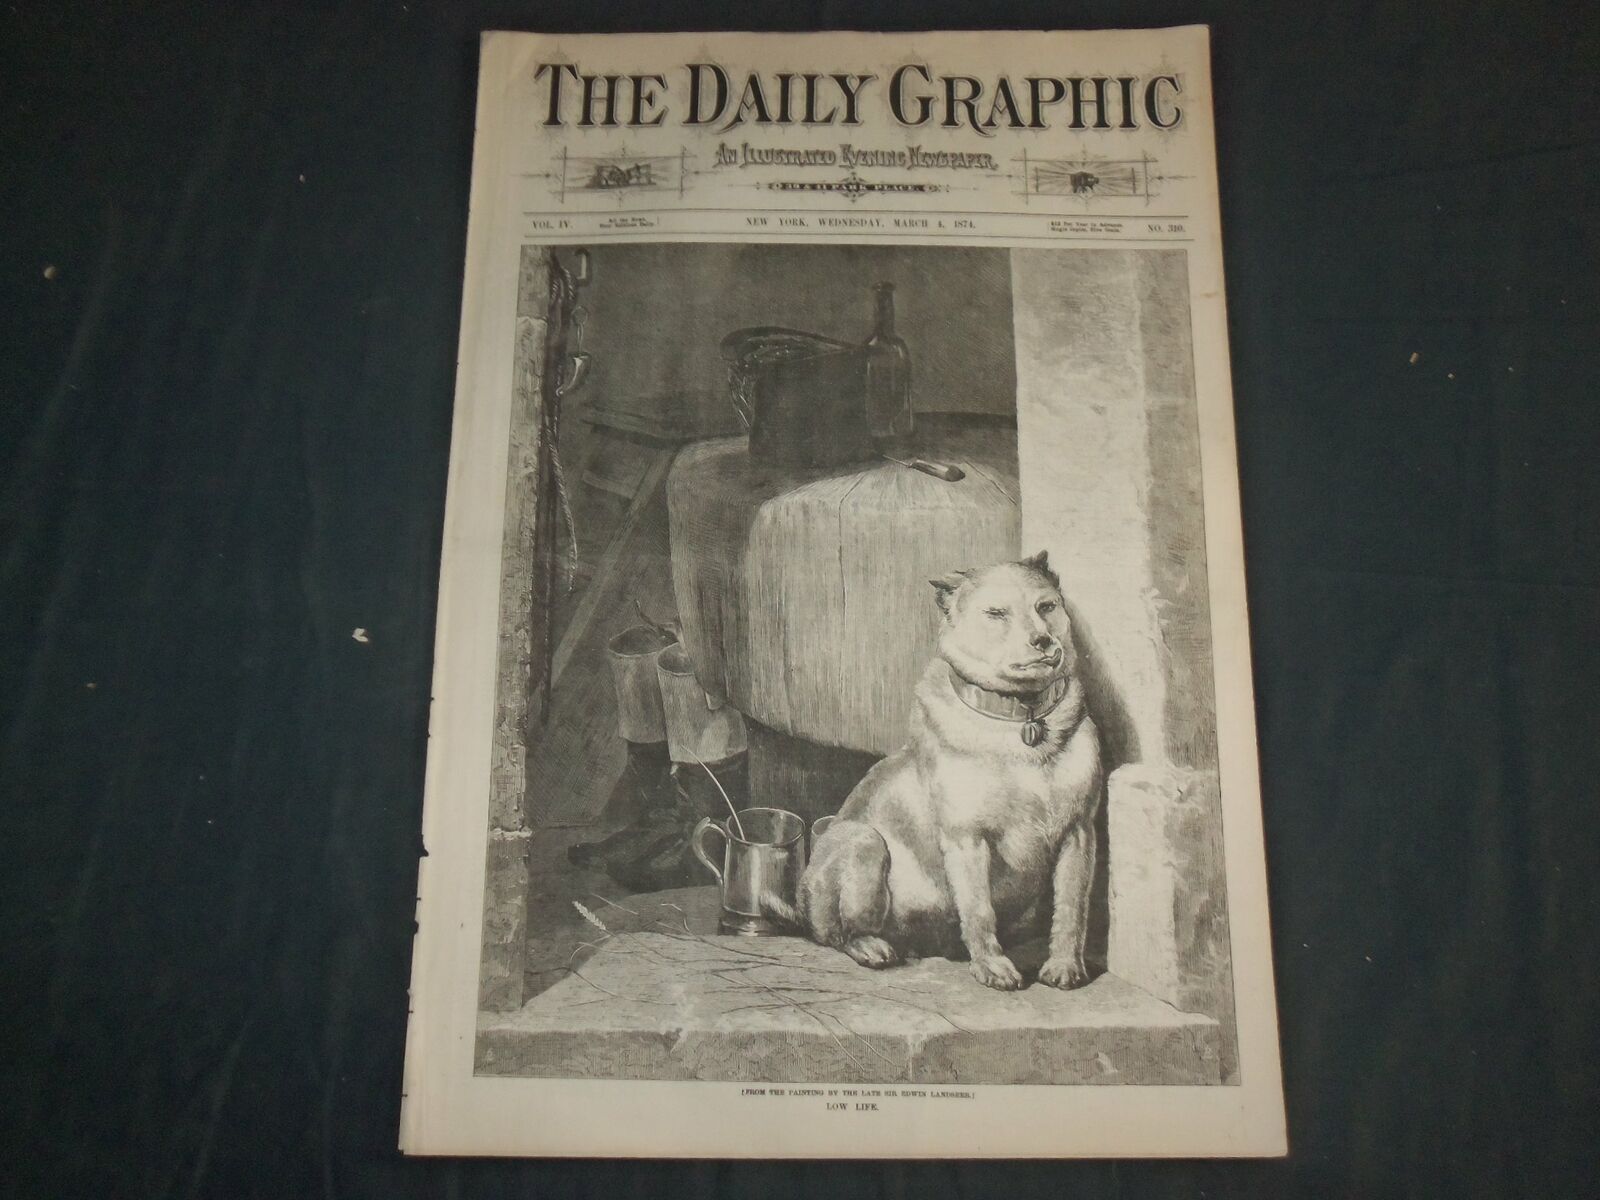 1874 MARCH 4 THE DAILY GRAPHIC NEWSPAPER - LOW LIFE - NT 7650